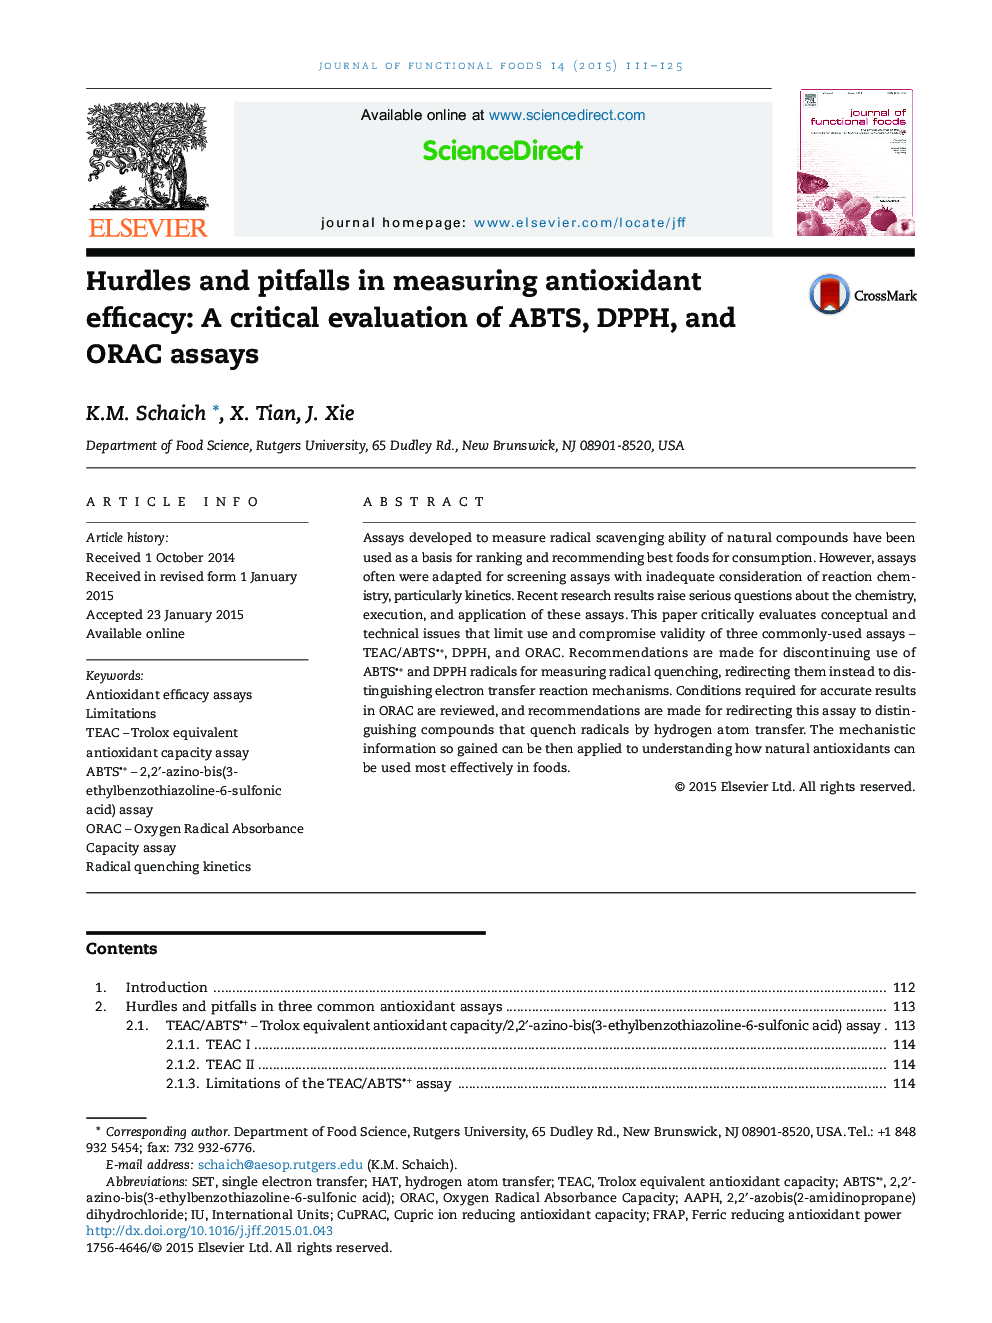 Hurdles and pitfalls in measuring antioxidant efficacy: A critical evaluation of ABTS, DPPH, and ORAC assays